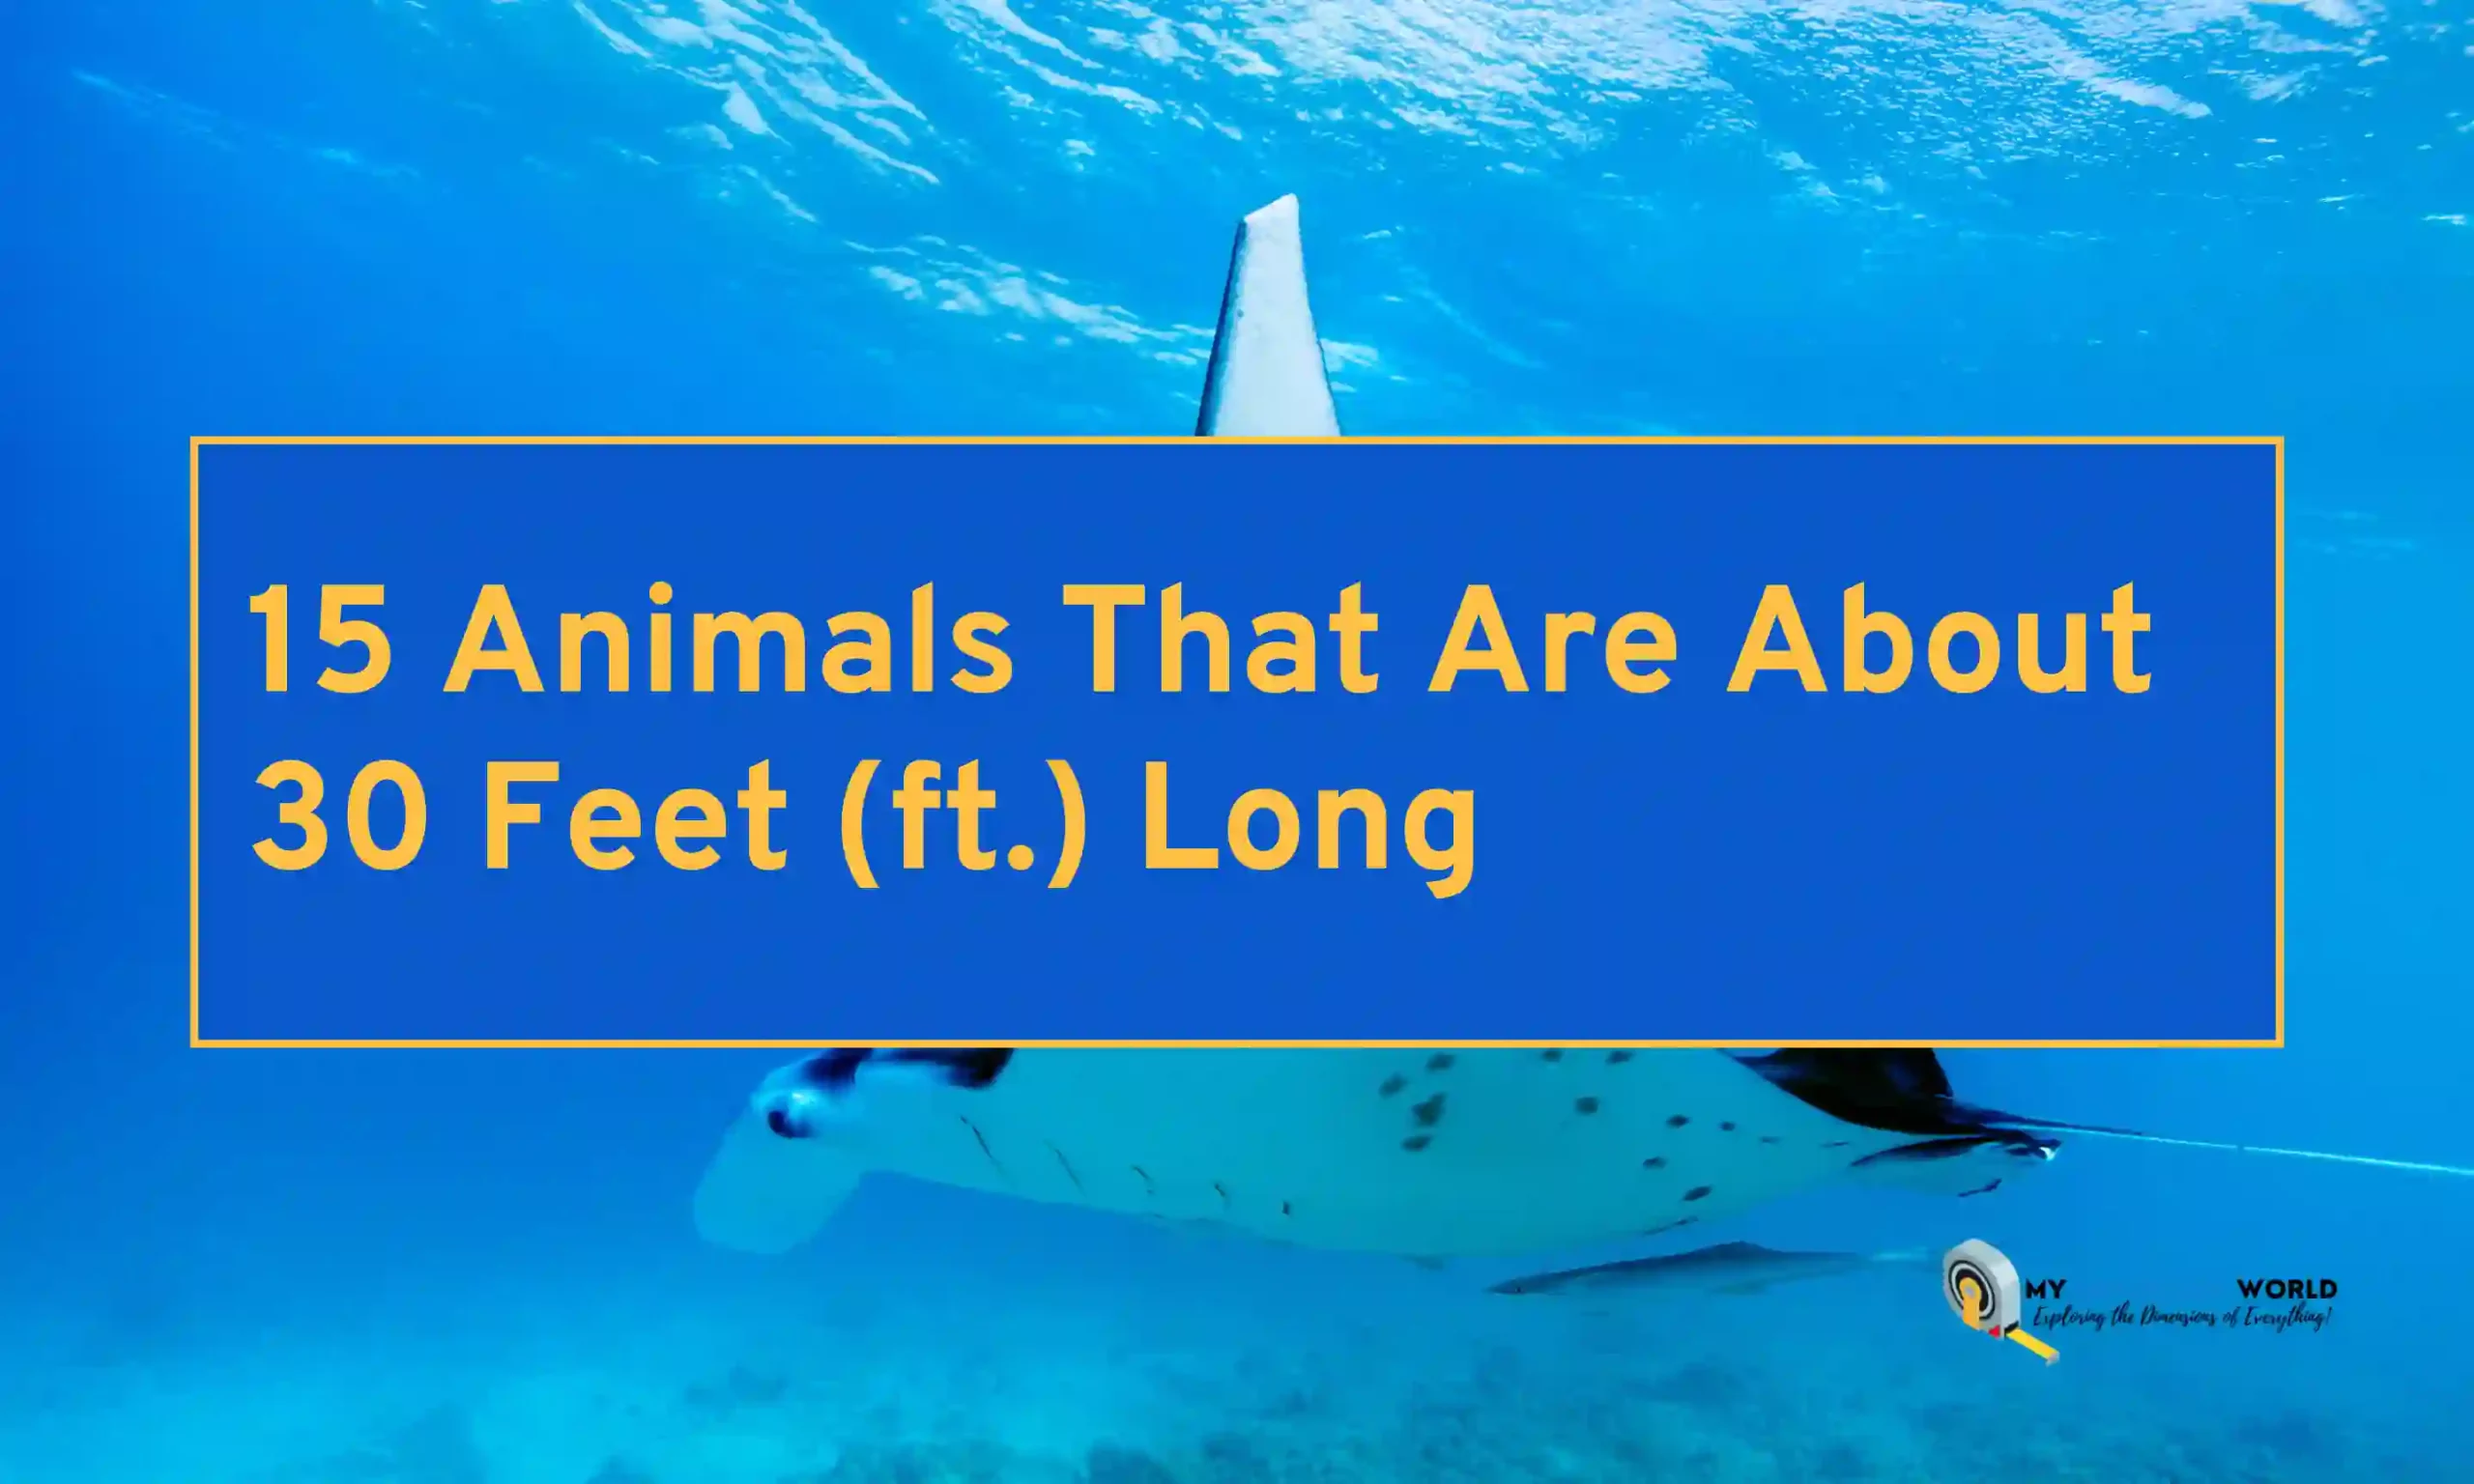 15 Animals That Are About 30 Feet (ft.) Long